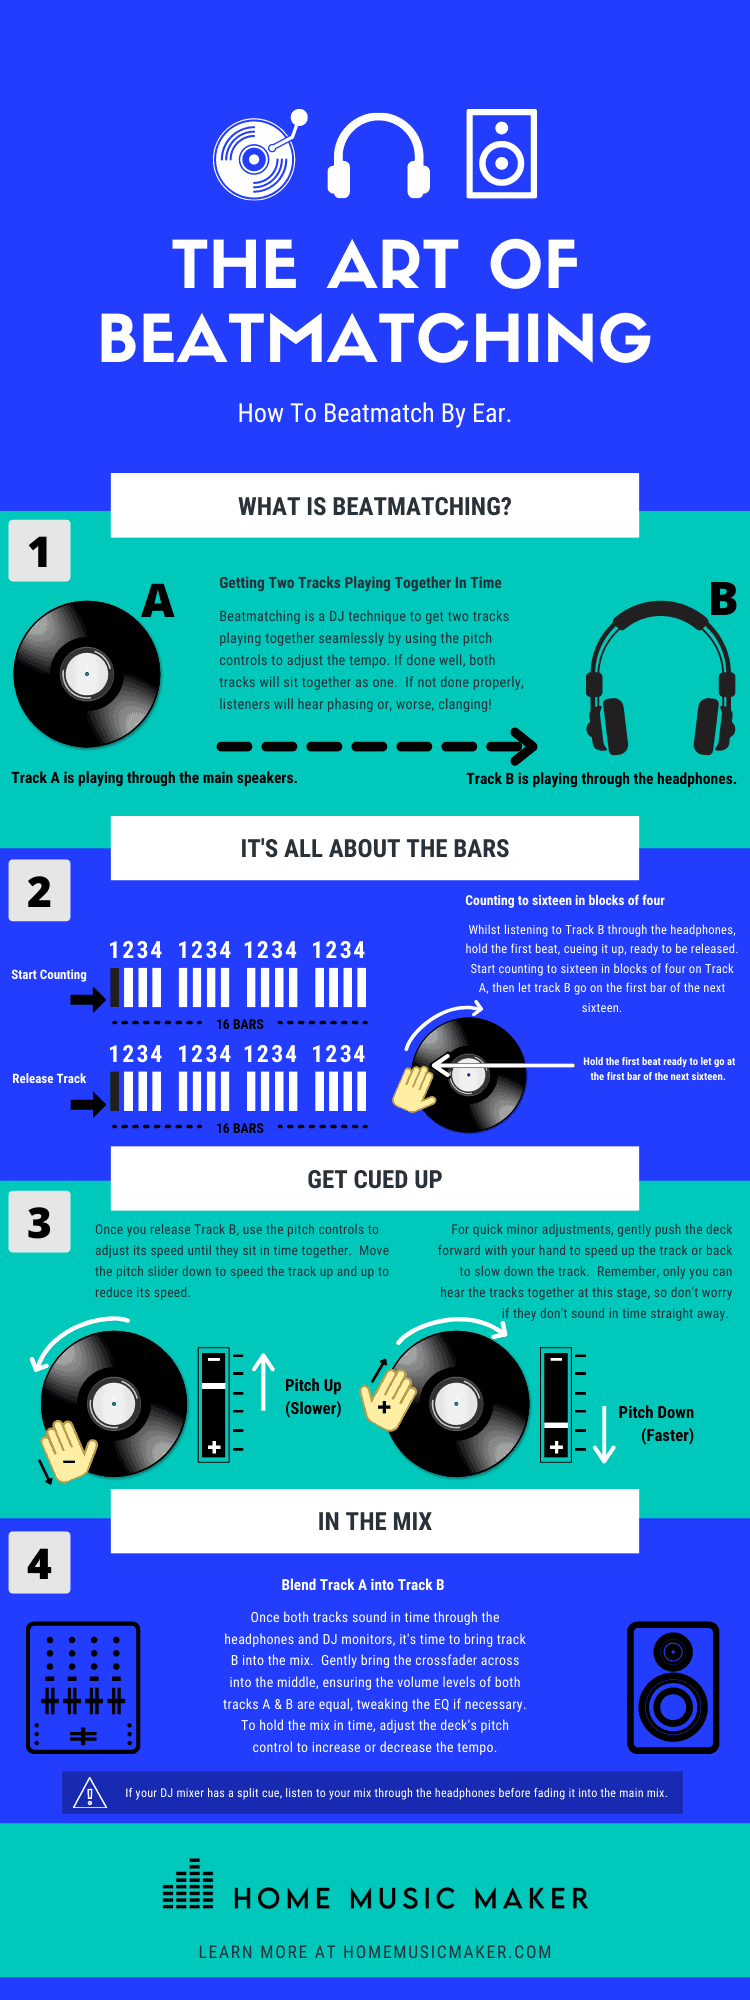 The Art Of Beatmatching - 

Beatmatching is probably the single most important skill for a DJ to master. It's what allows you to switch between songs seamlessly, and it can make or break a set.

Follow this guide and learn how to beatmatch.
